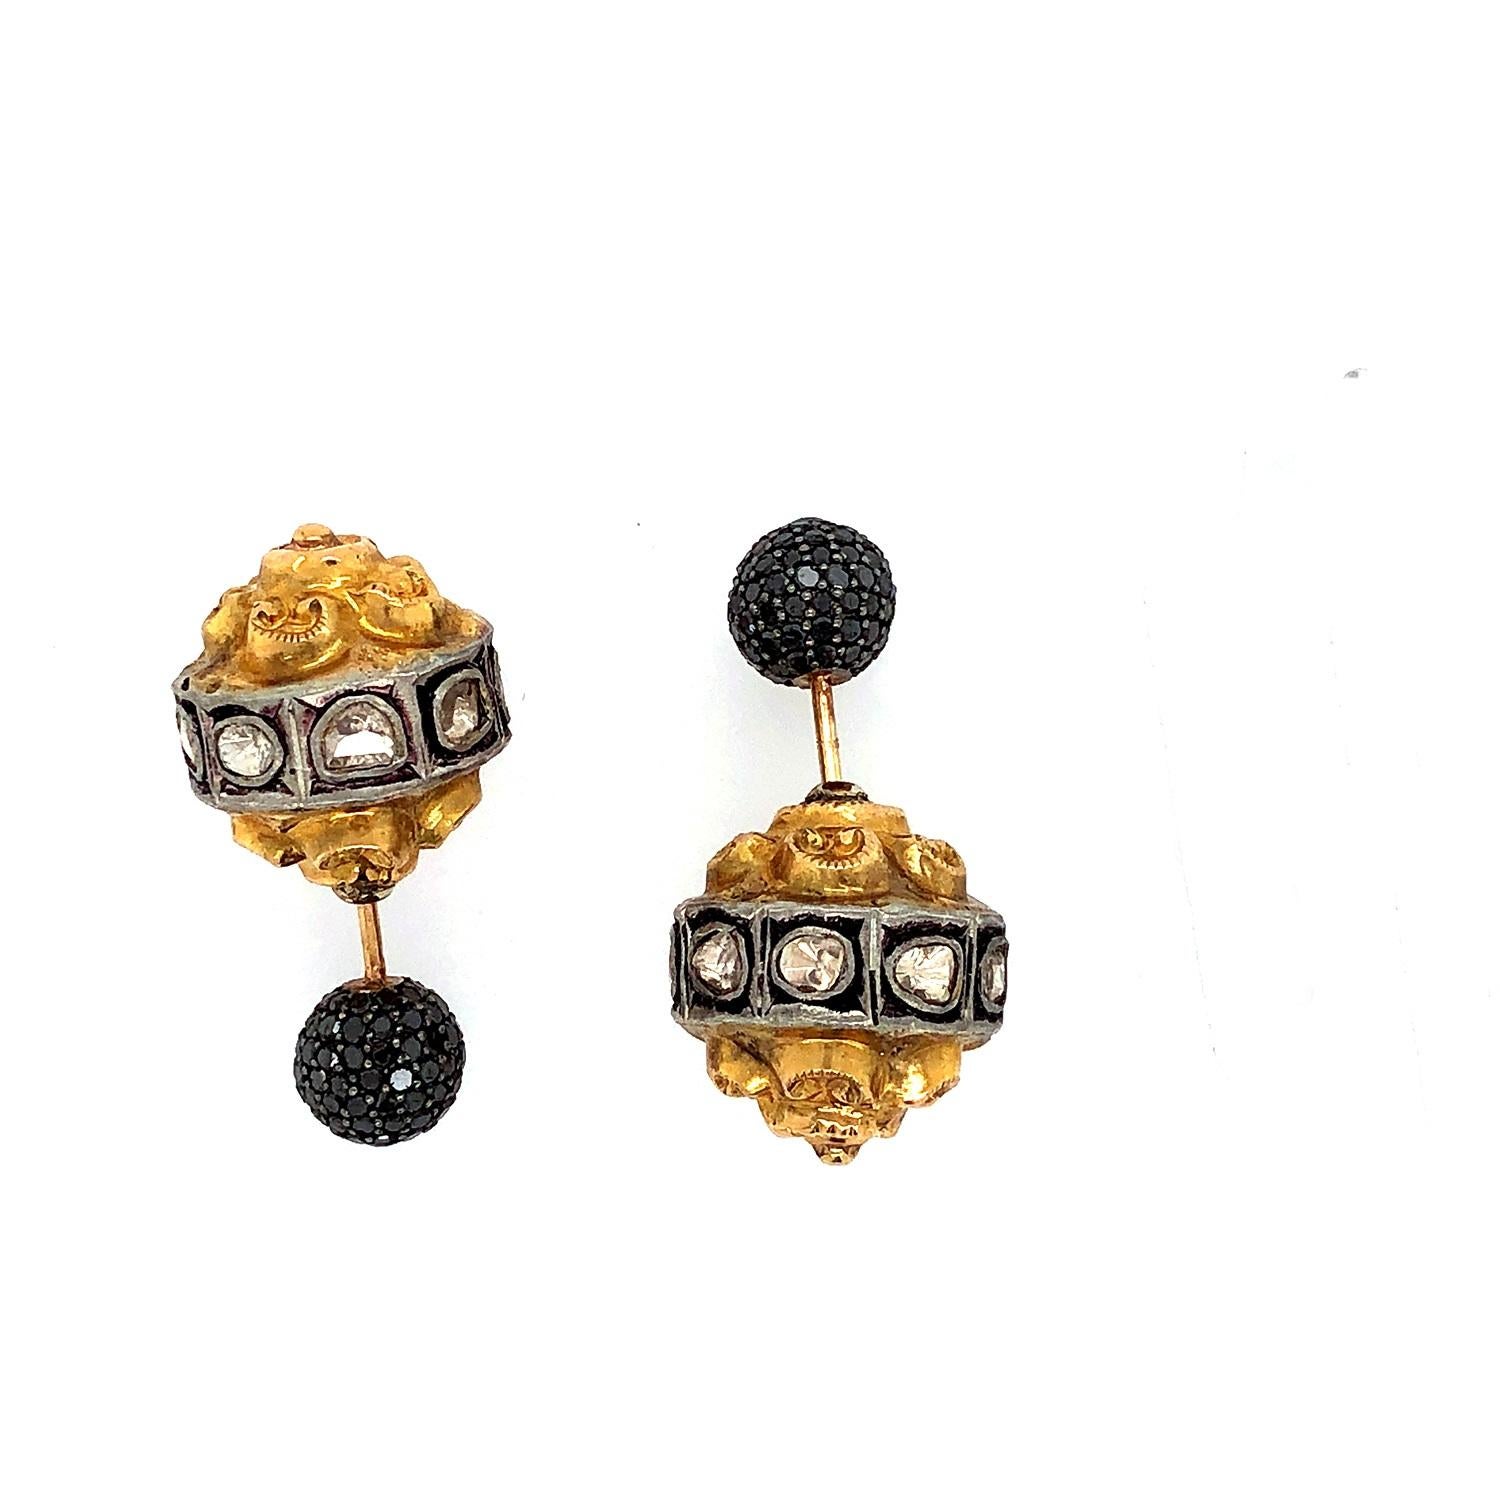 Artisan Antique Looking Double Sided Earrings With Diamonds Made In 14k Gold & Silver For Sale